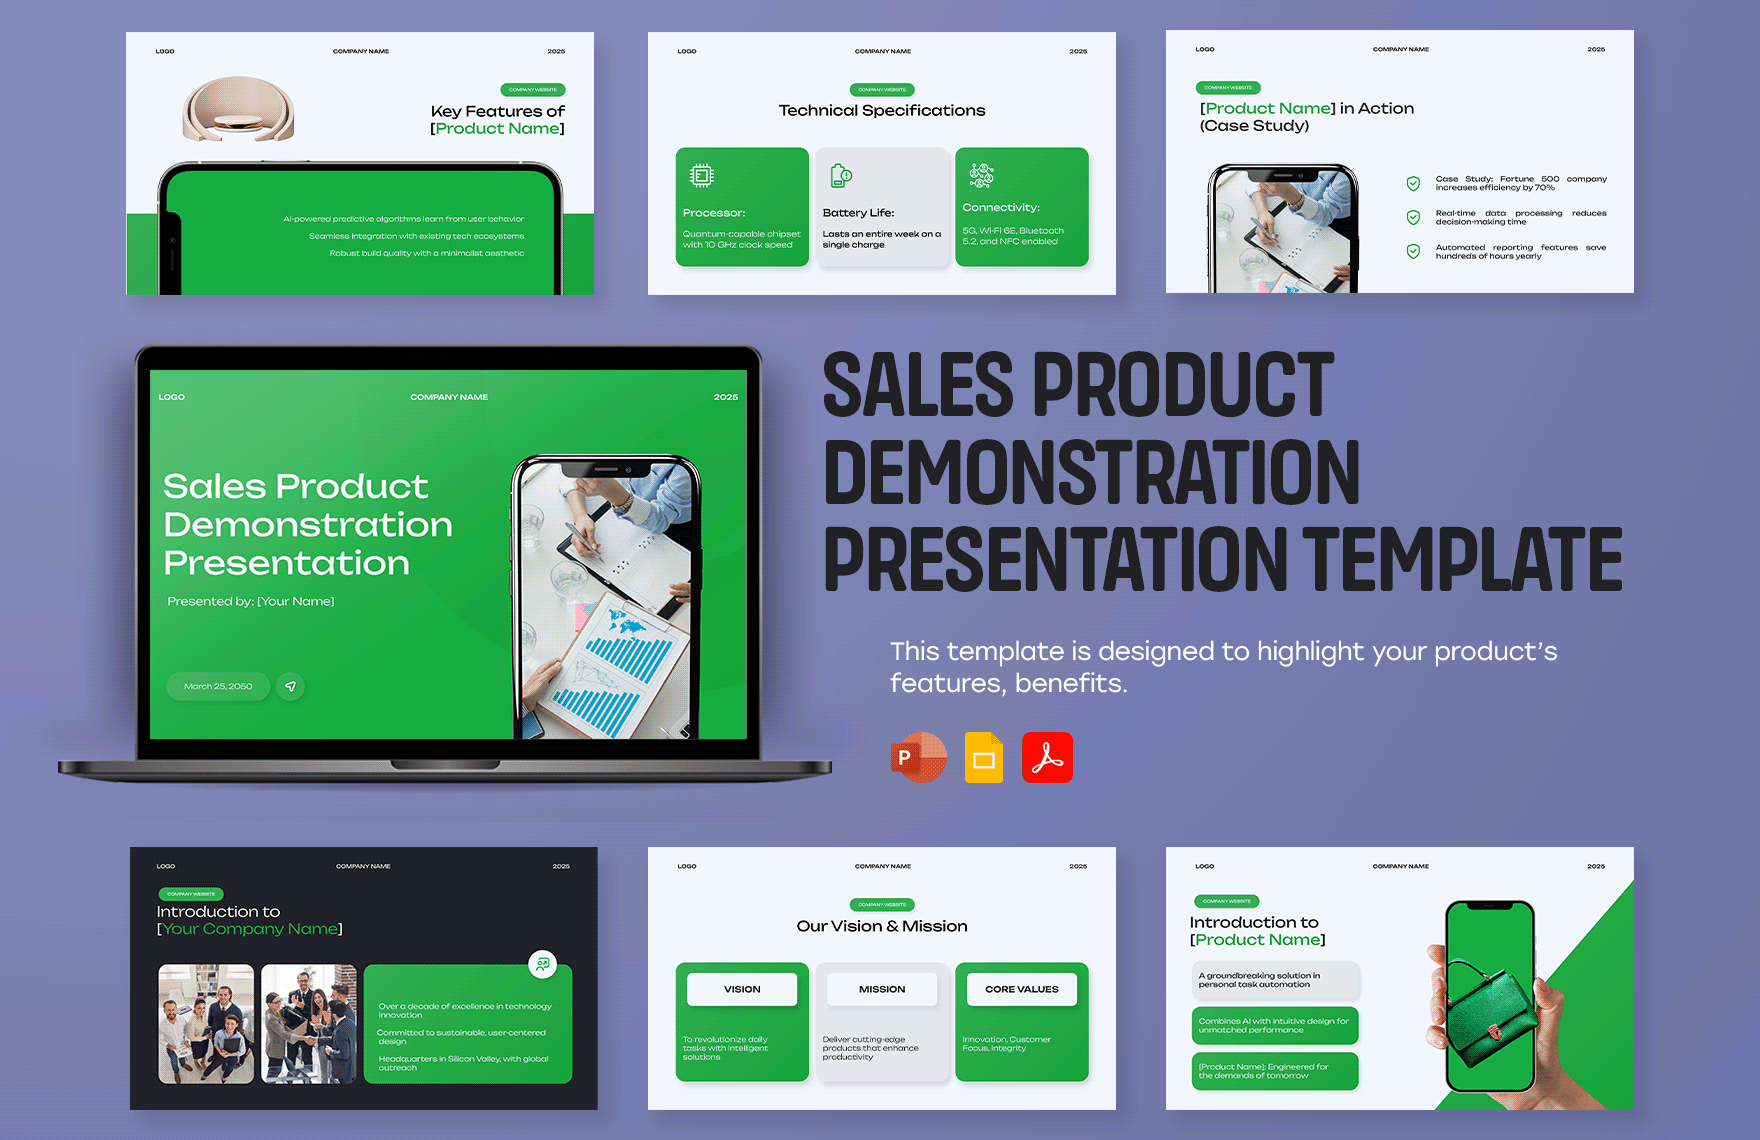 Sales Product Demonstration Presentation Template